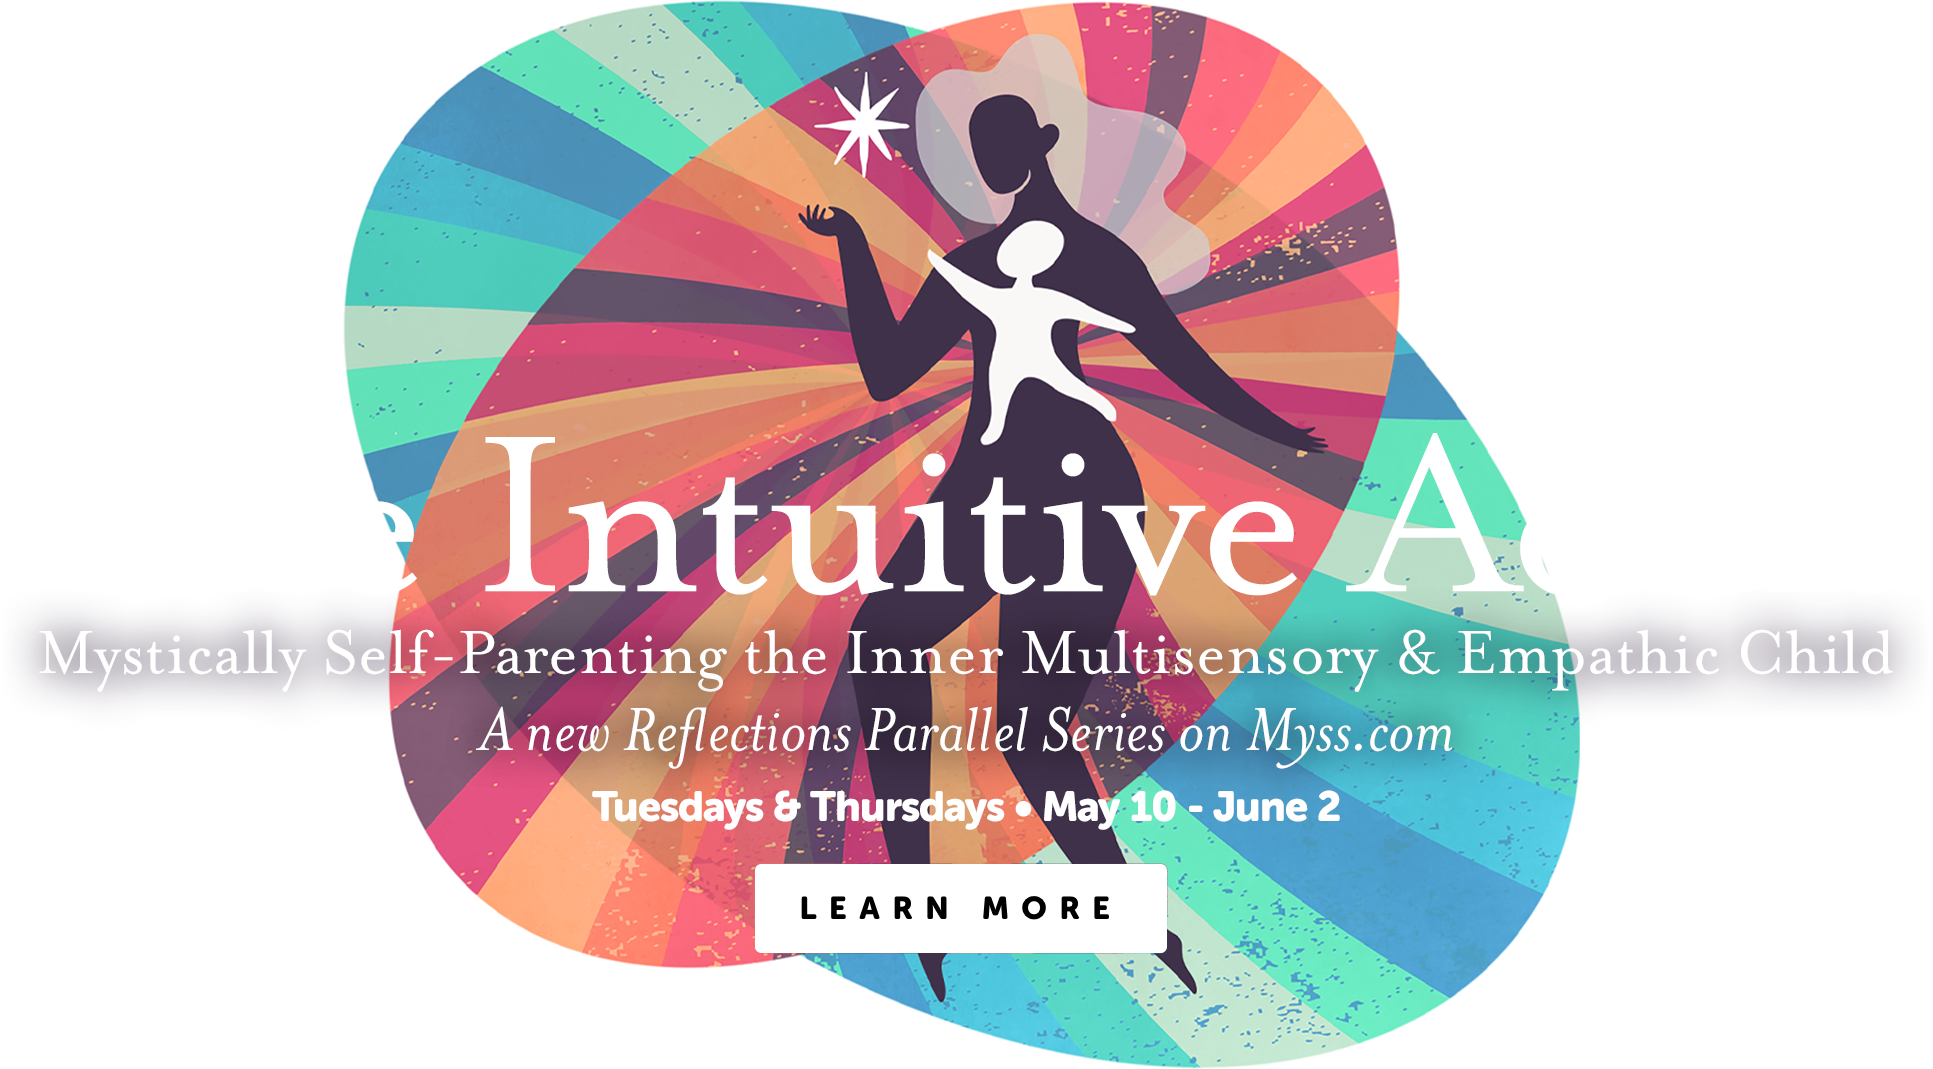 The Intuitive Adult - A new Reflections Parallel Series on Myss.com starting May 10